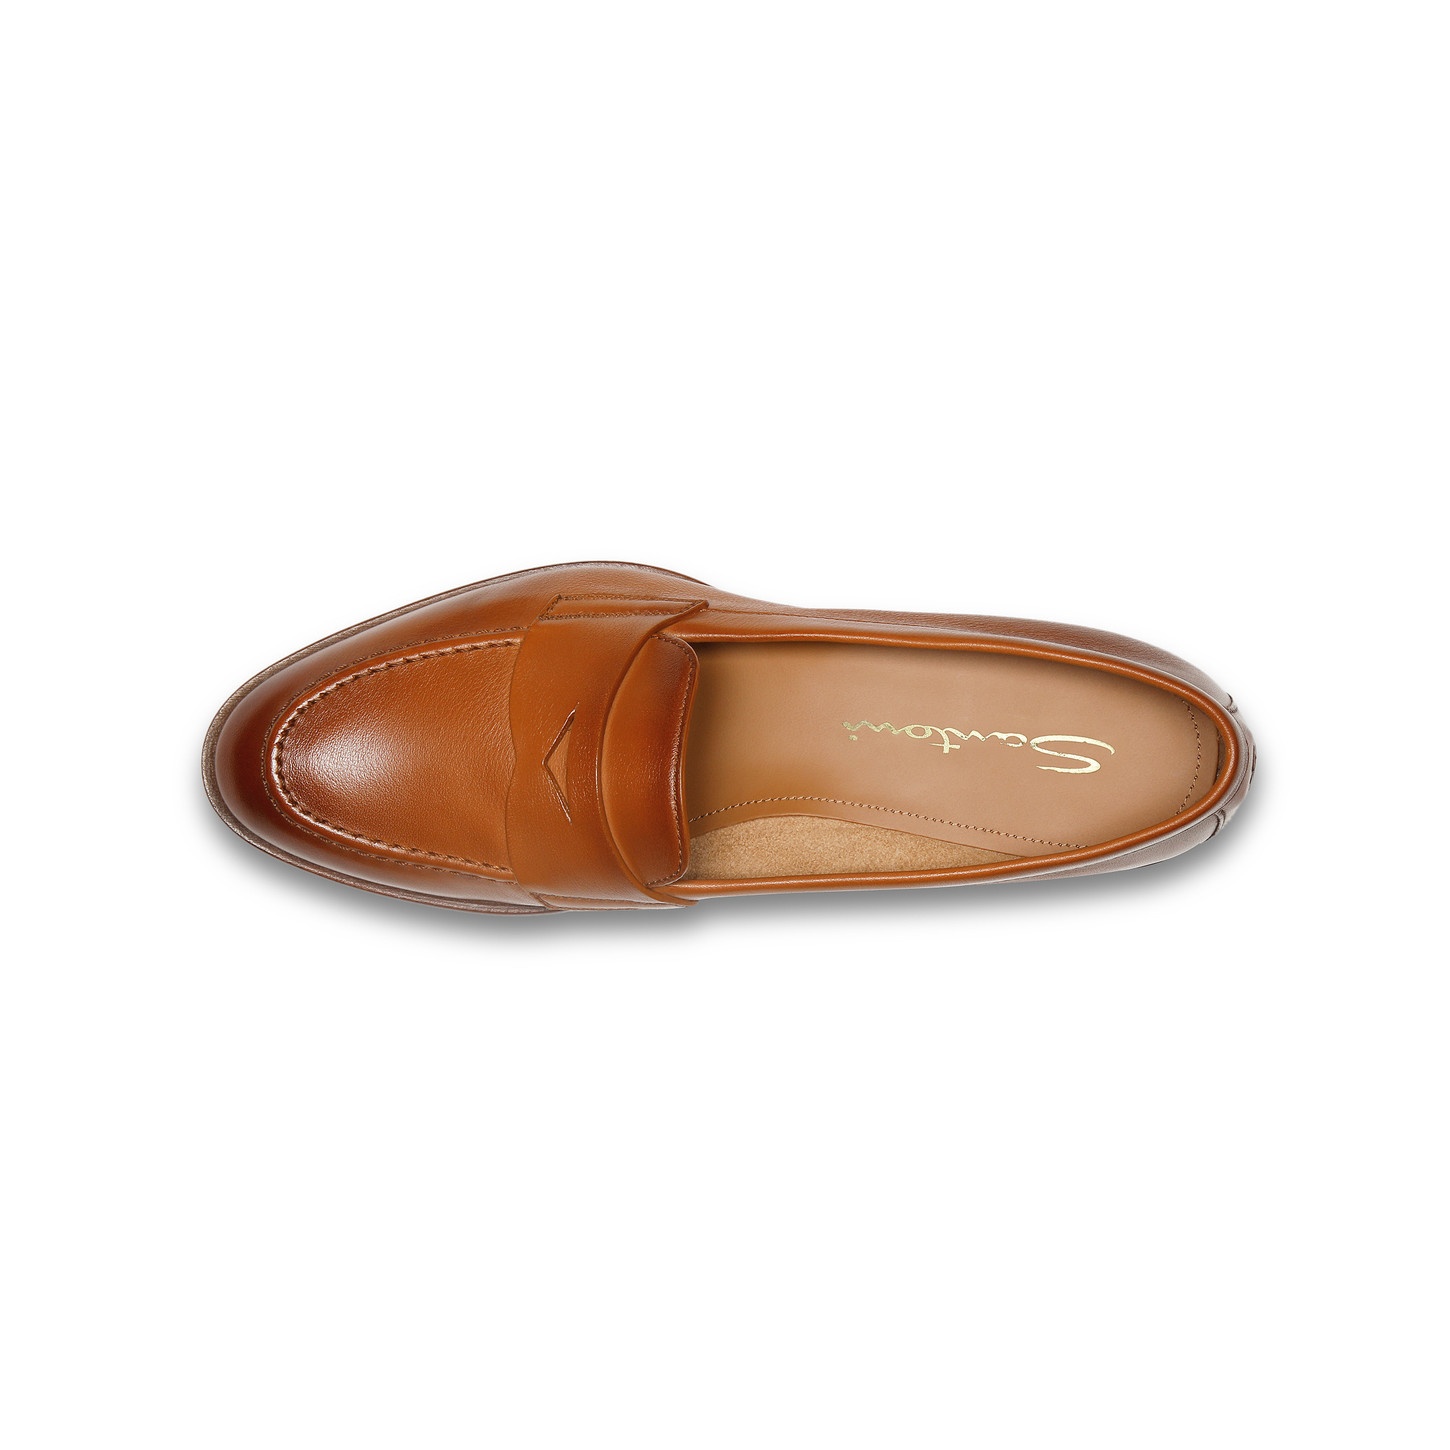 Women’s brown leather penny loafer - 5